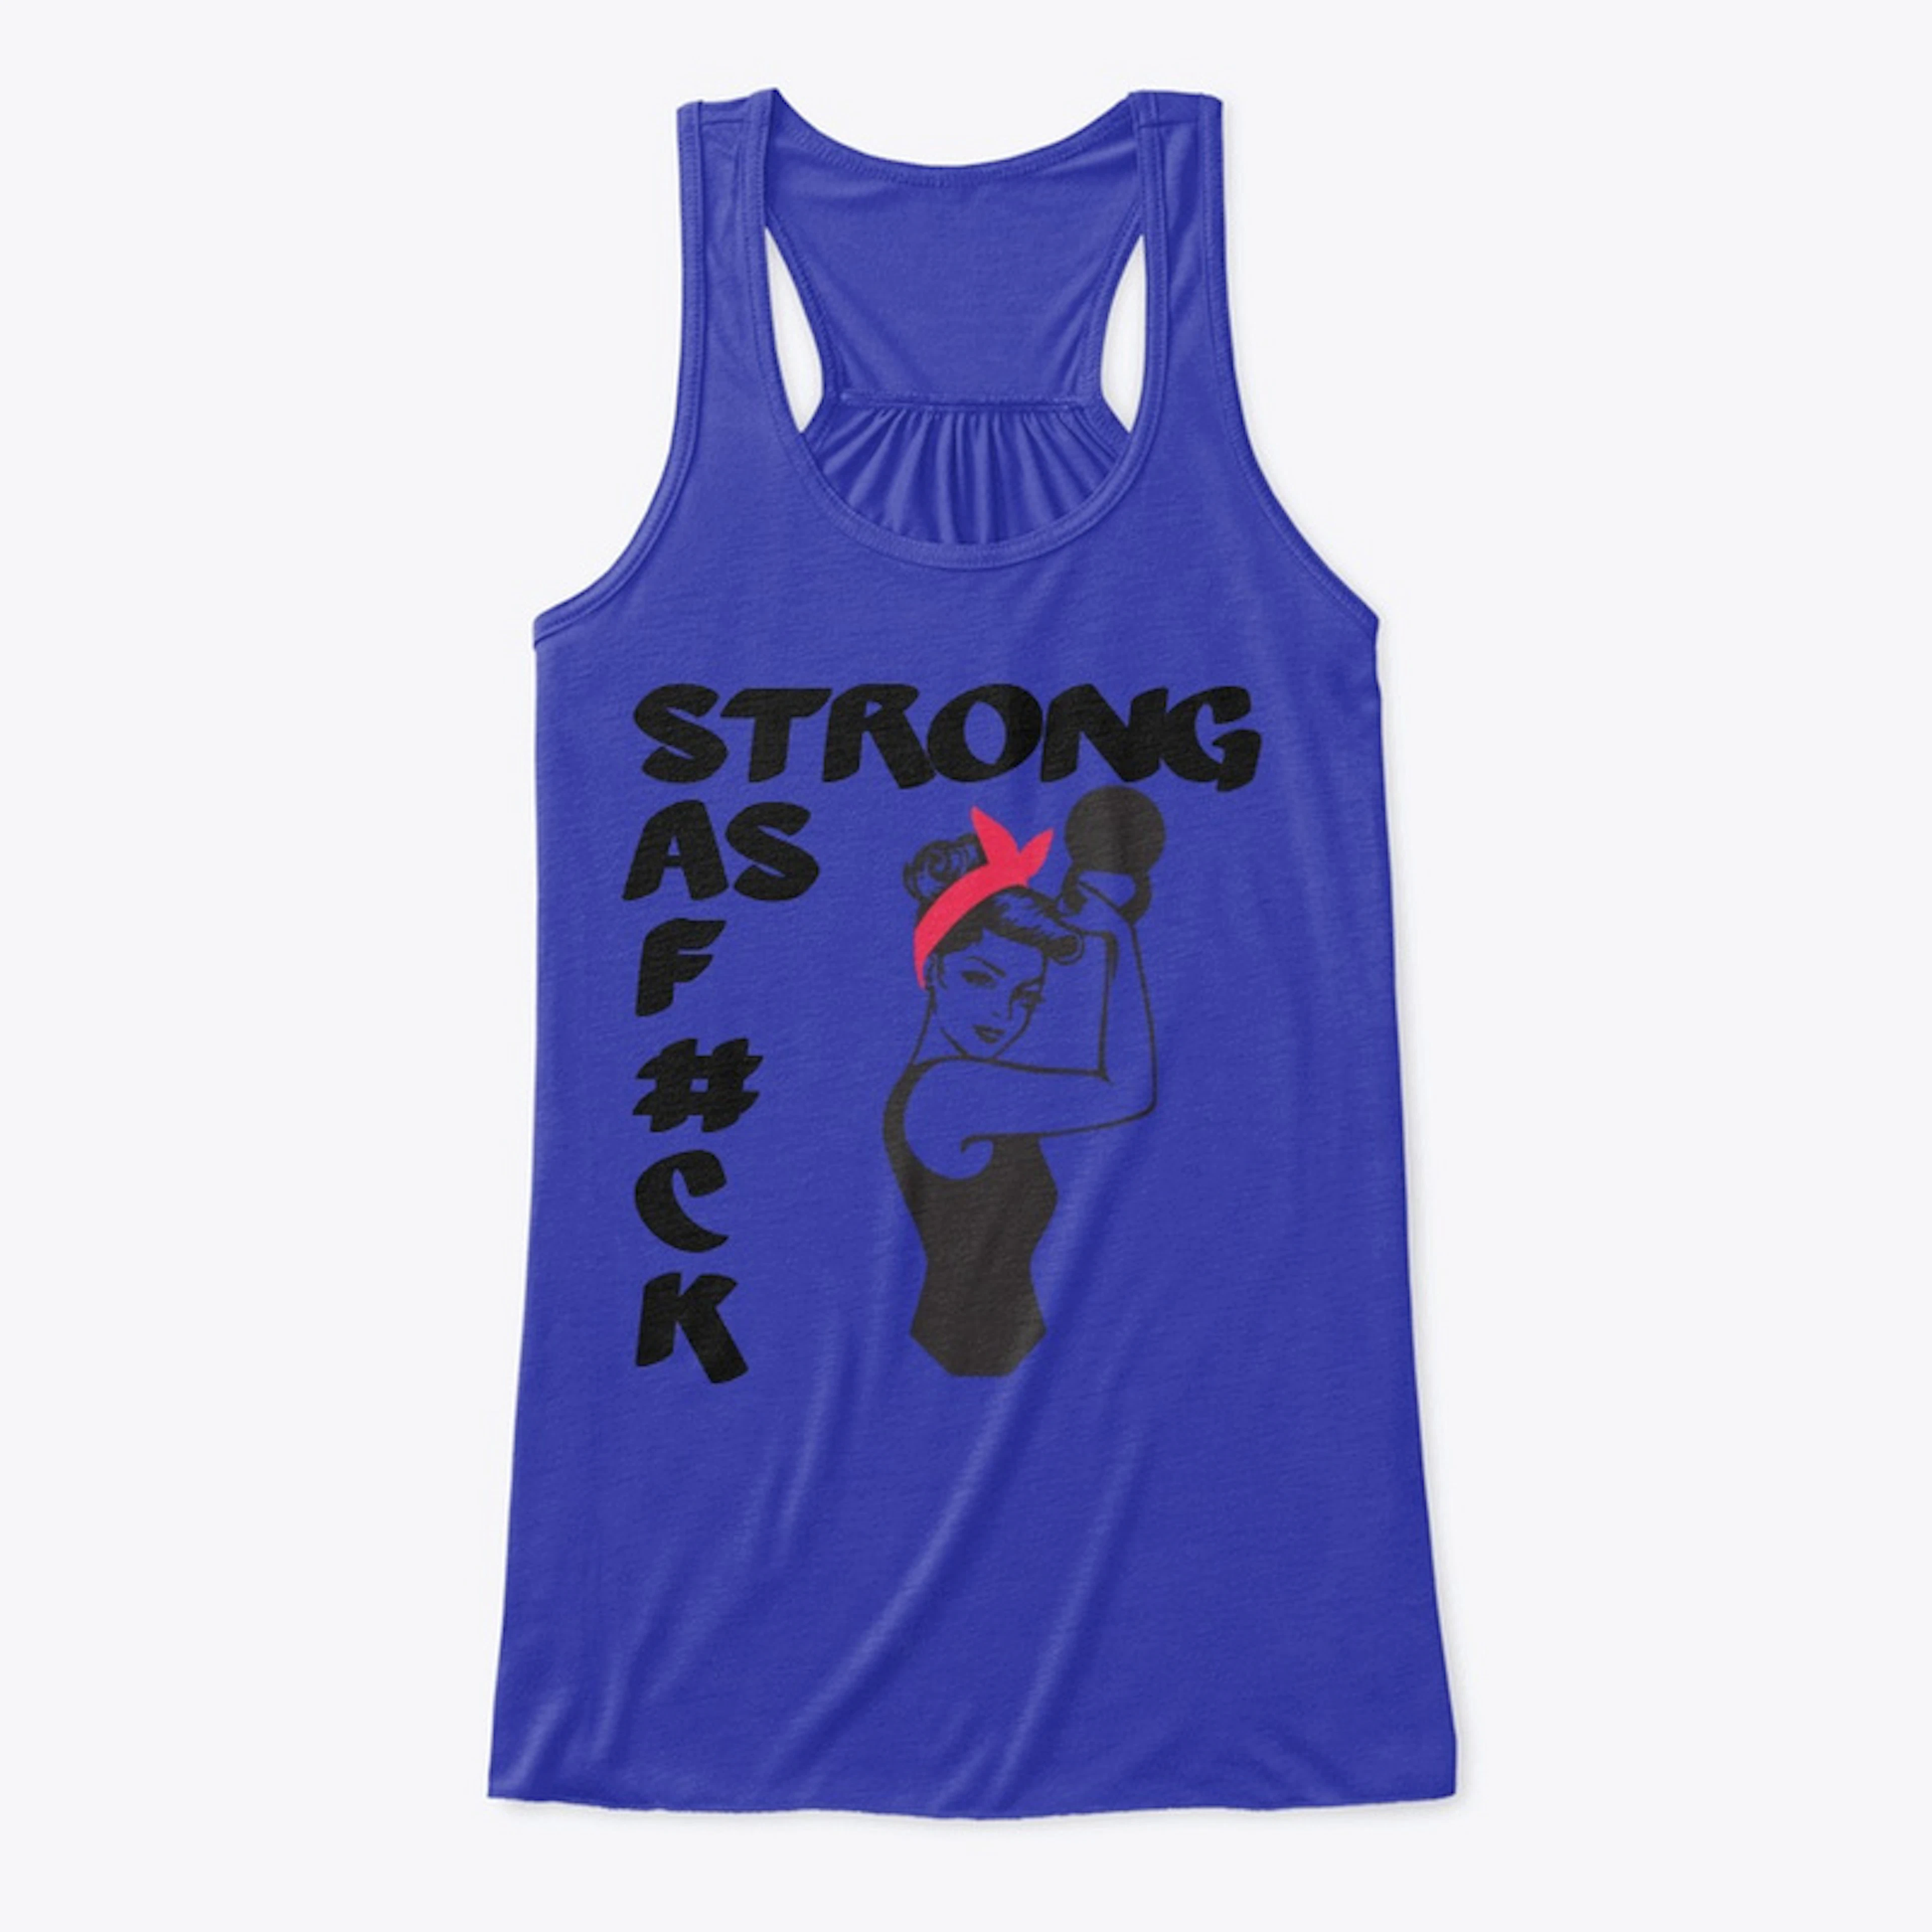 STRONG AS F#CK